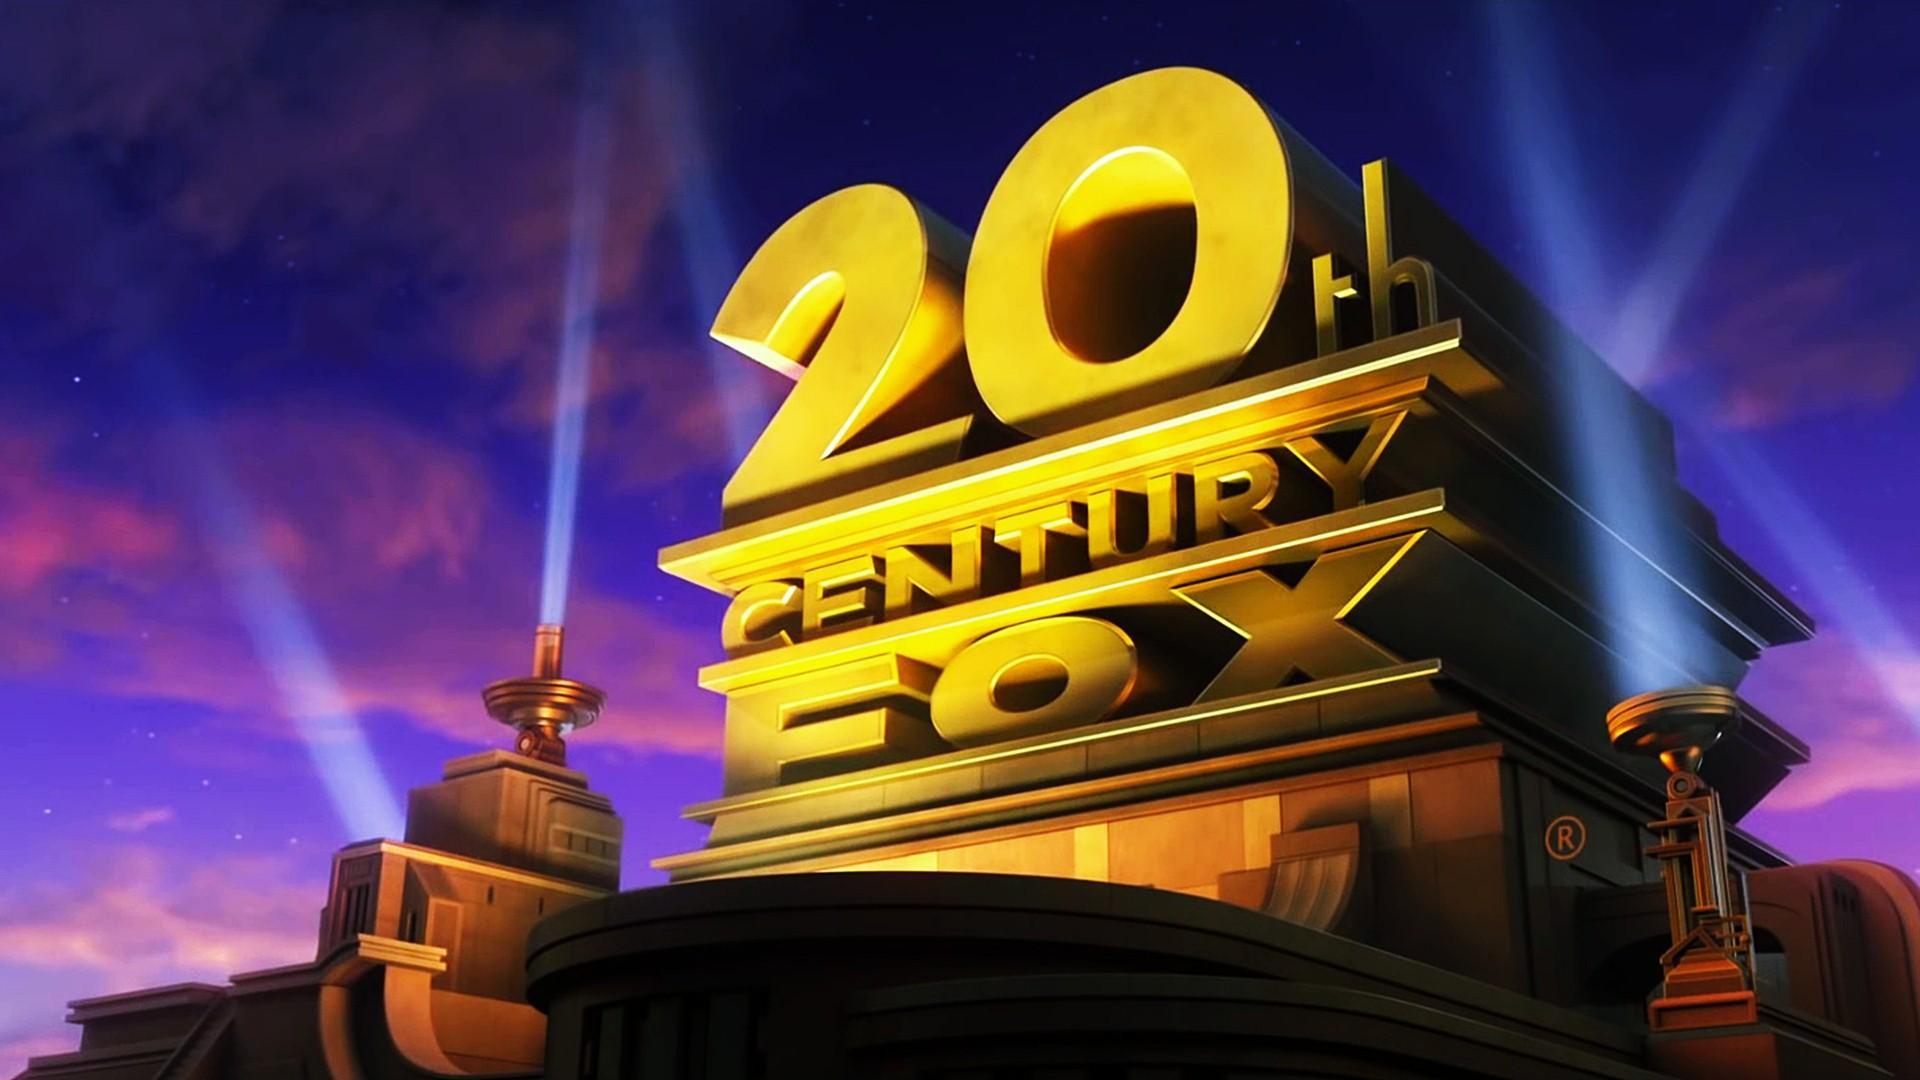 20th Century Fox Wallpapers HD Backgrounds, Image, Pics, Photos